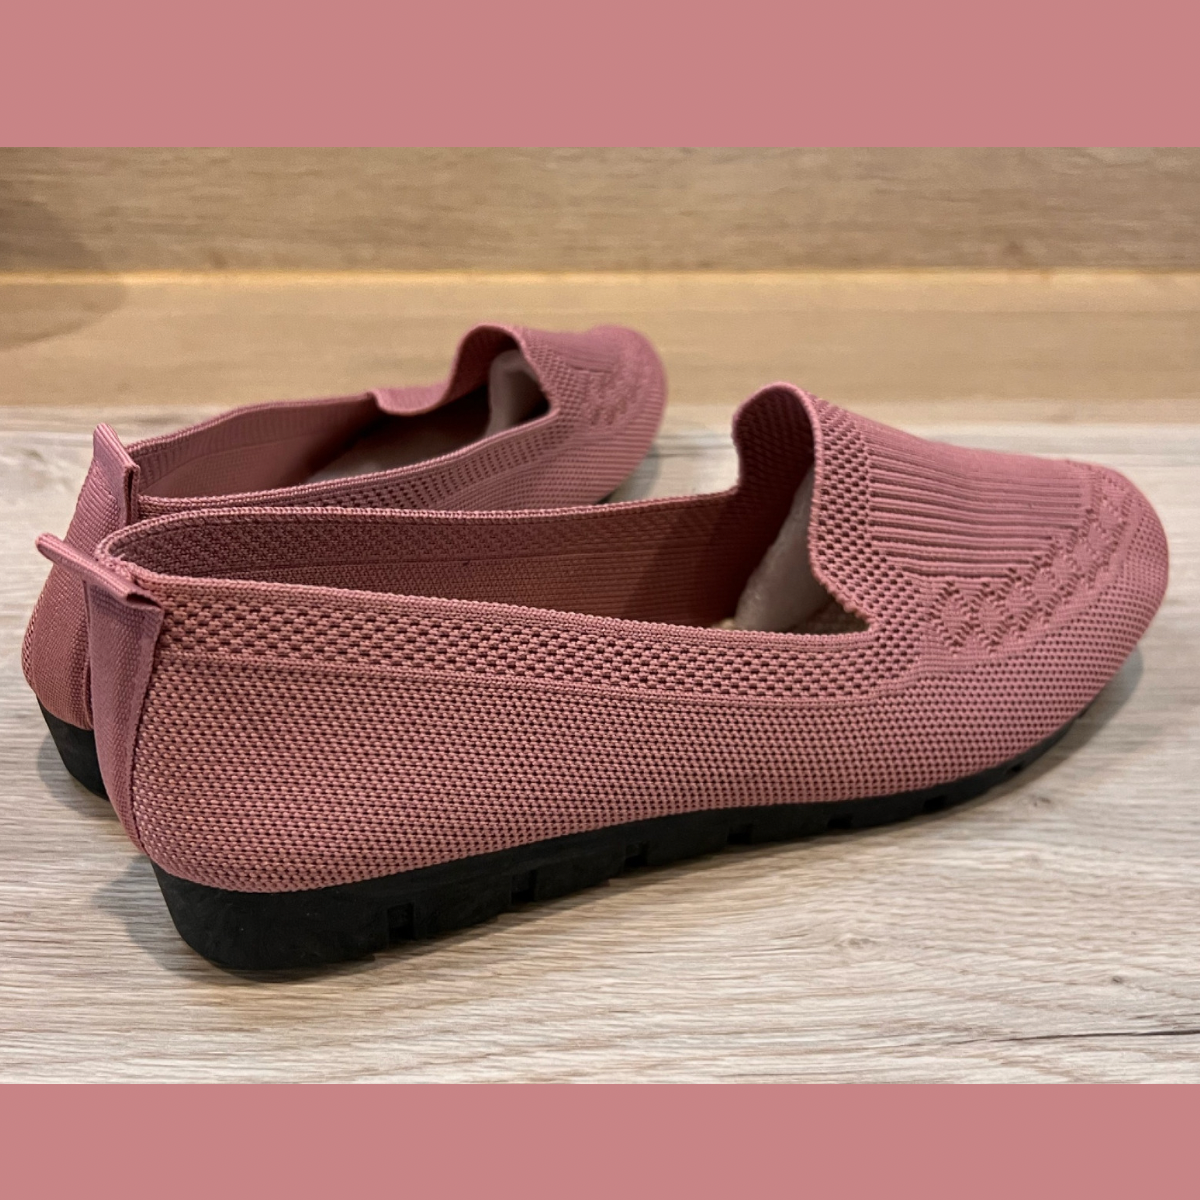 Soft Fabric Slip on lightweight loafers flat shoes